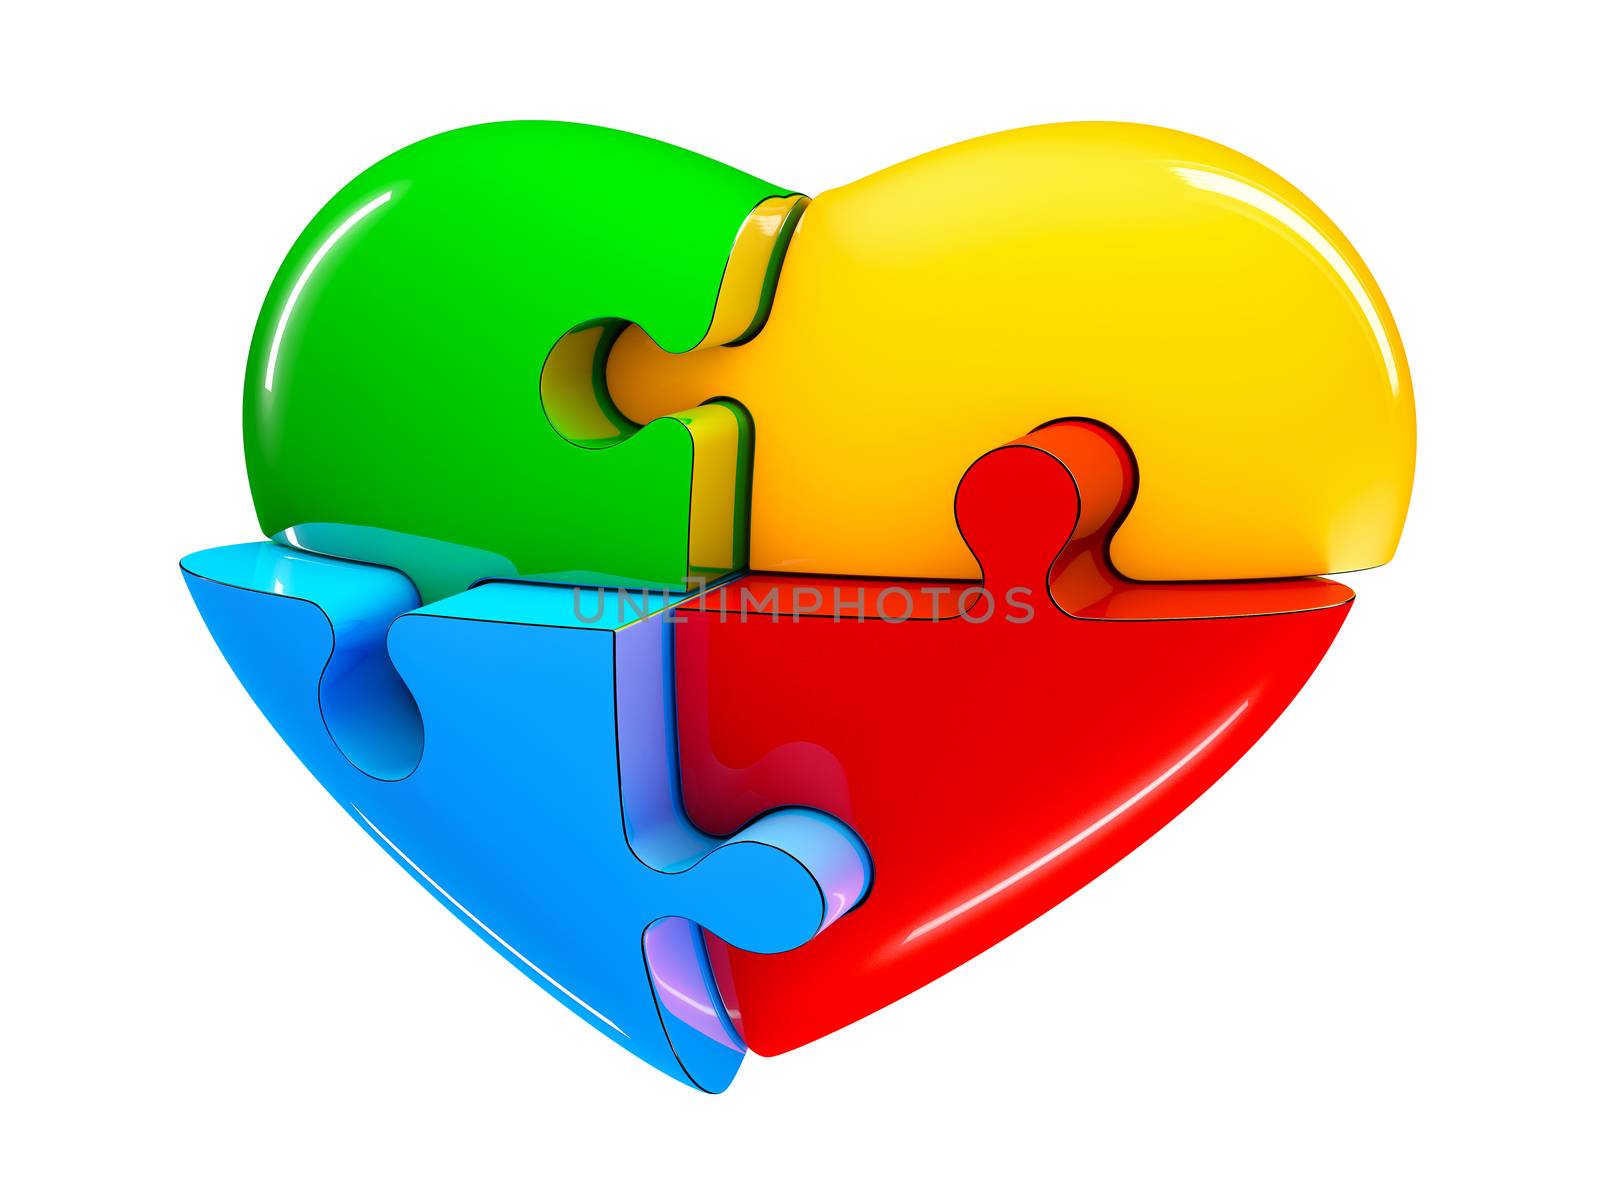 4 part jigsaw puzzle heart diagram 3d illustration isolated on white background by tussik